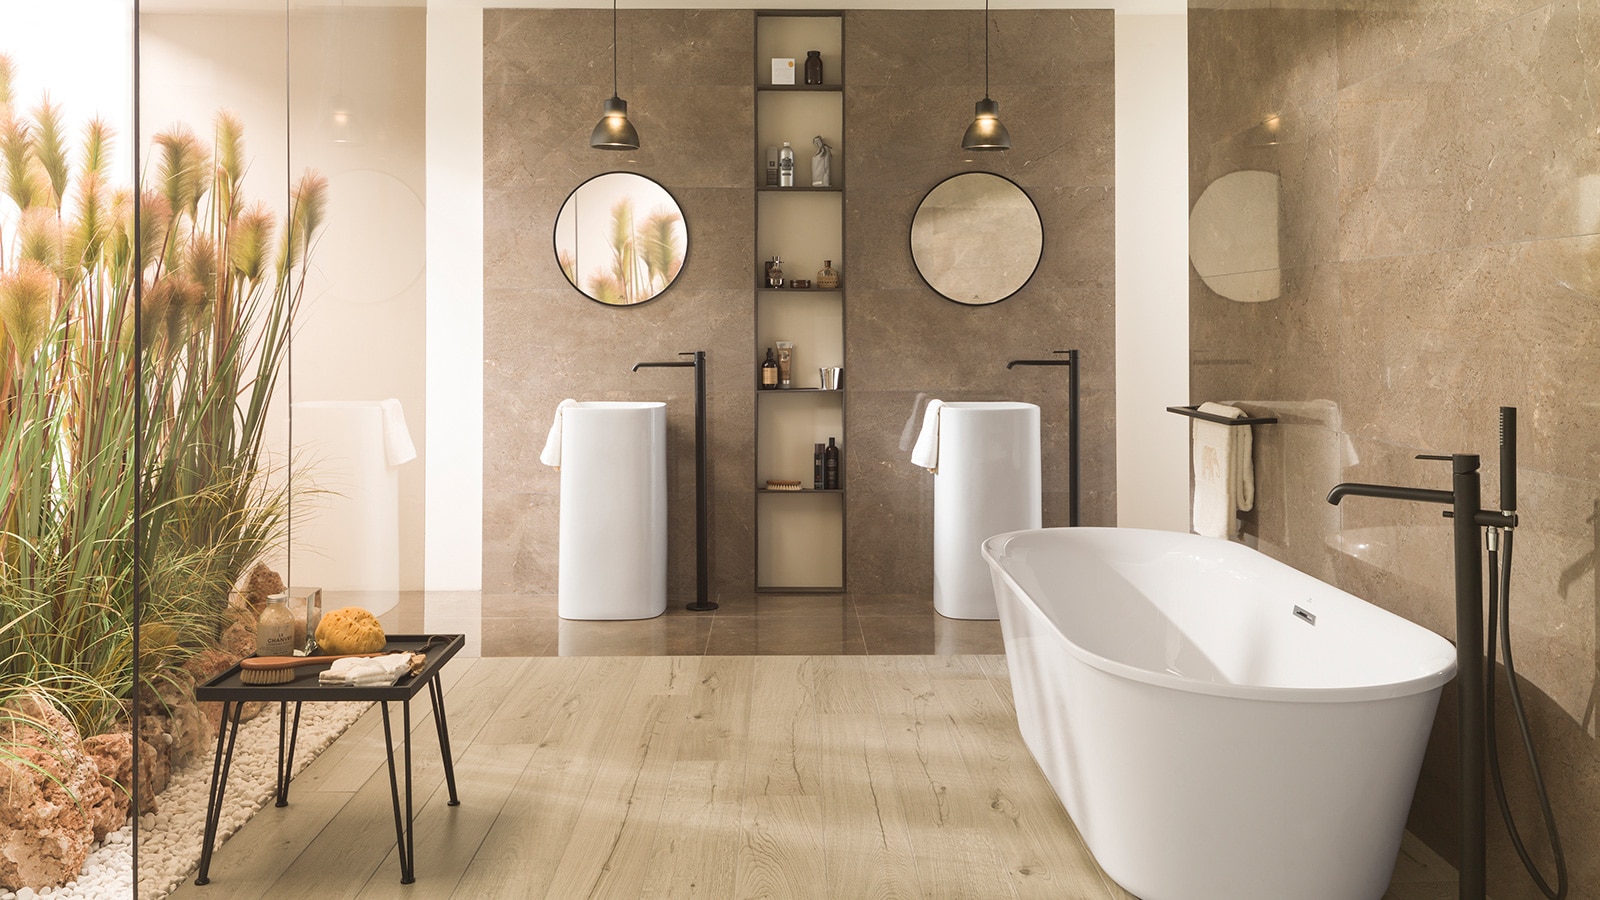 Elegance and harmony in beige and white bathrooms